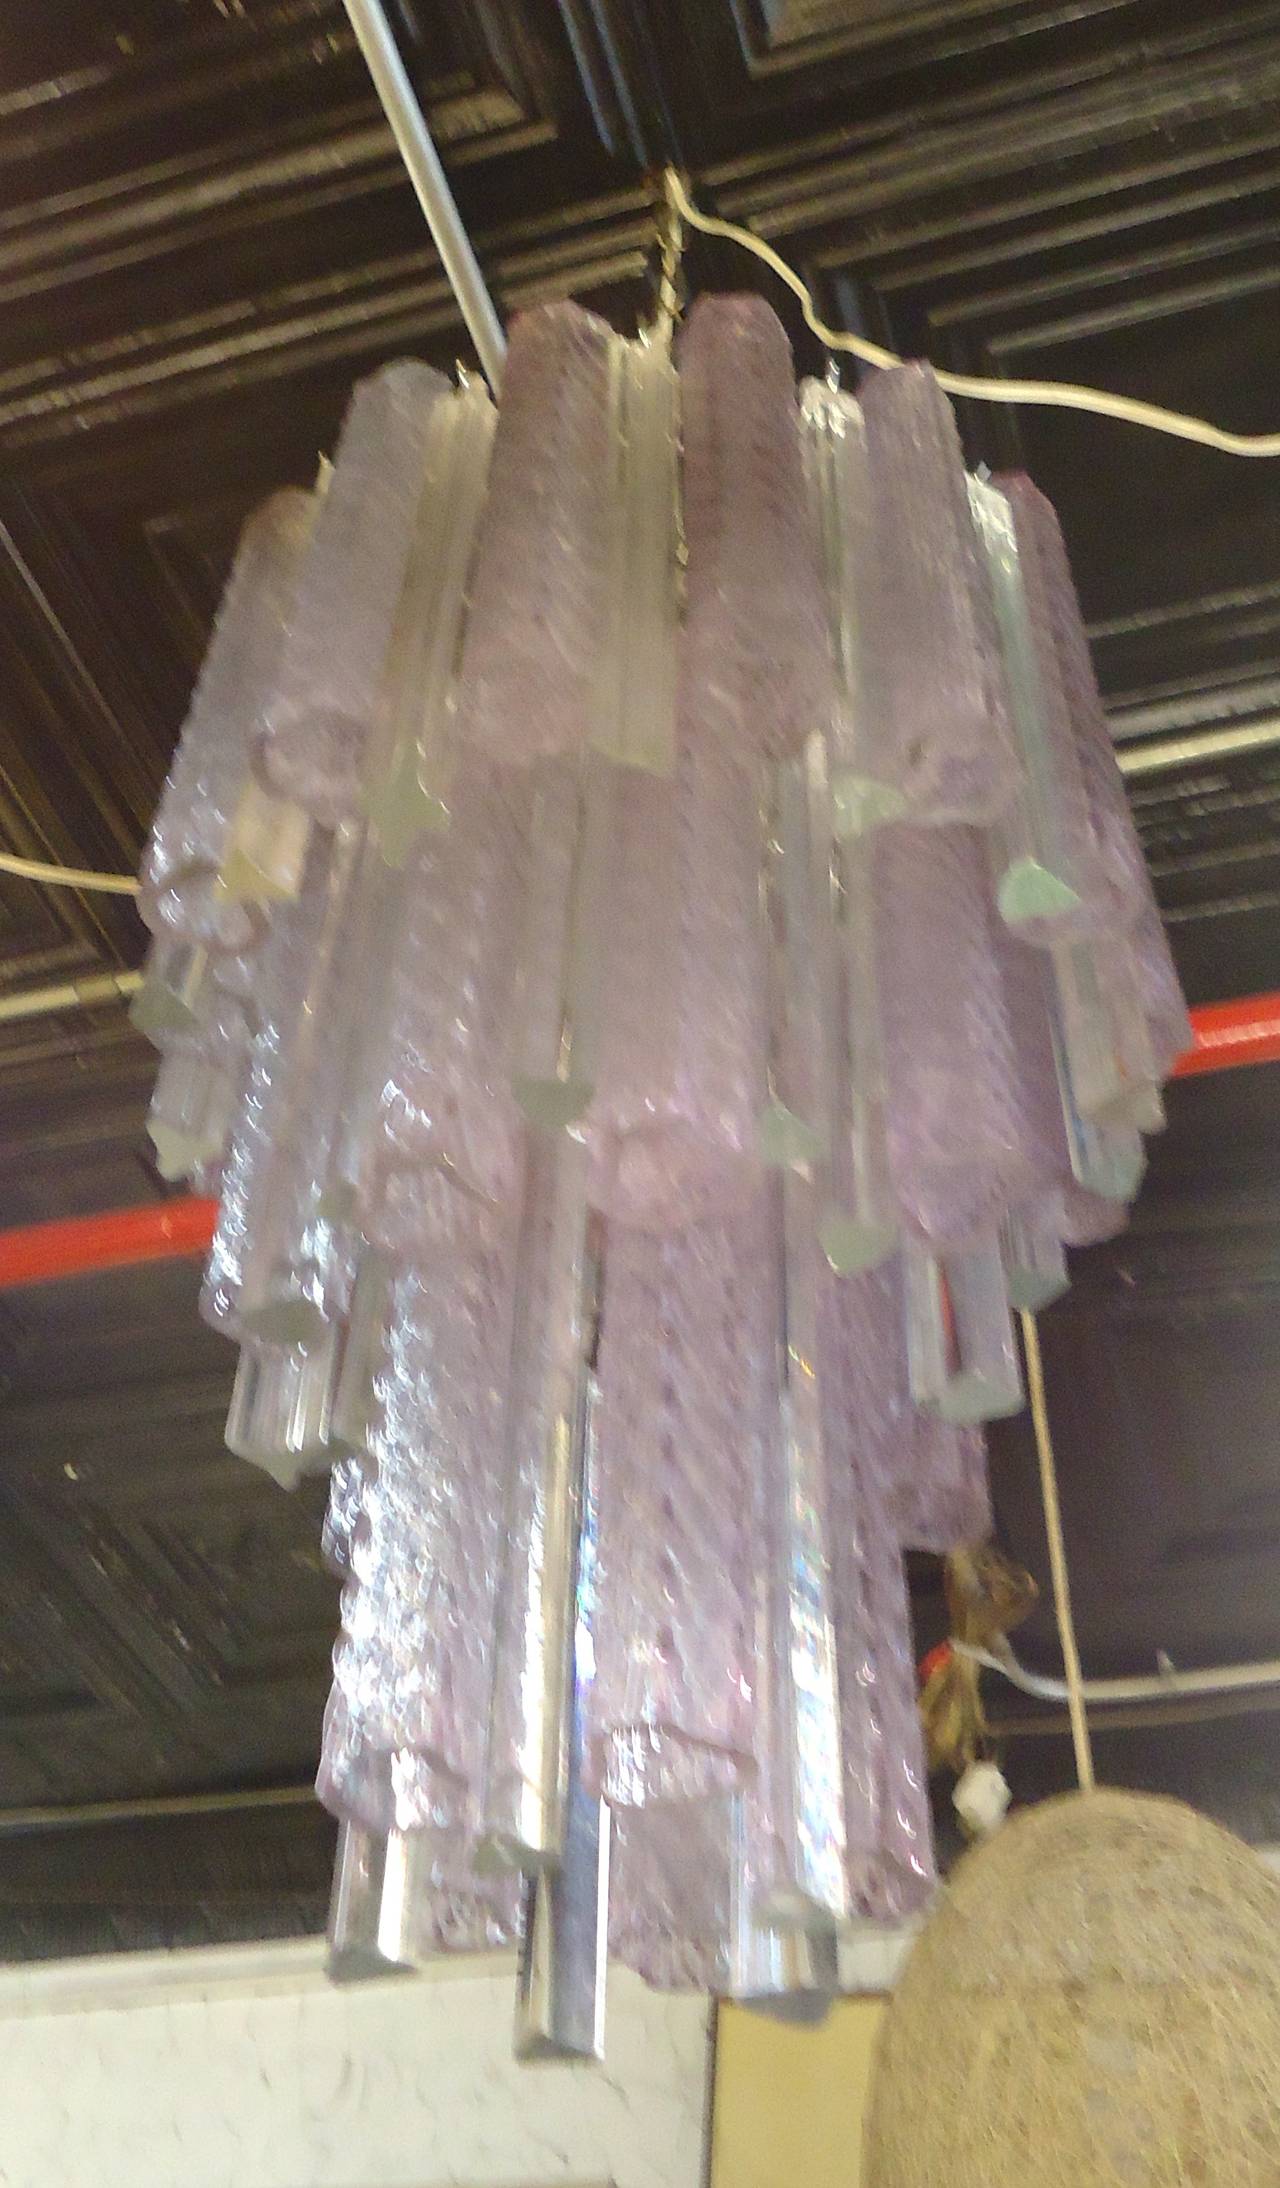 Gorgeous Italian chandelier with colored tube glass and prism glass, cascading down the brass frame. Very unusual purple hue glass.

(Please confirm item location - NY or NJ - with dealer).